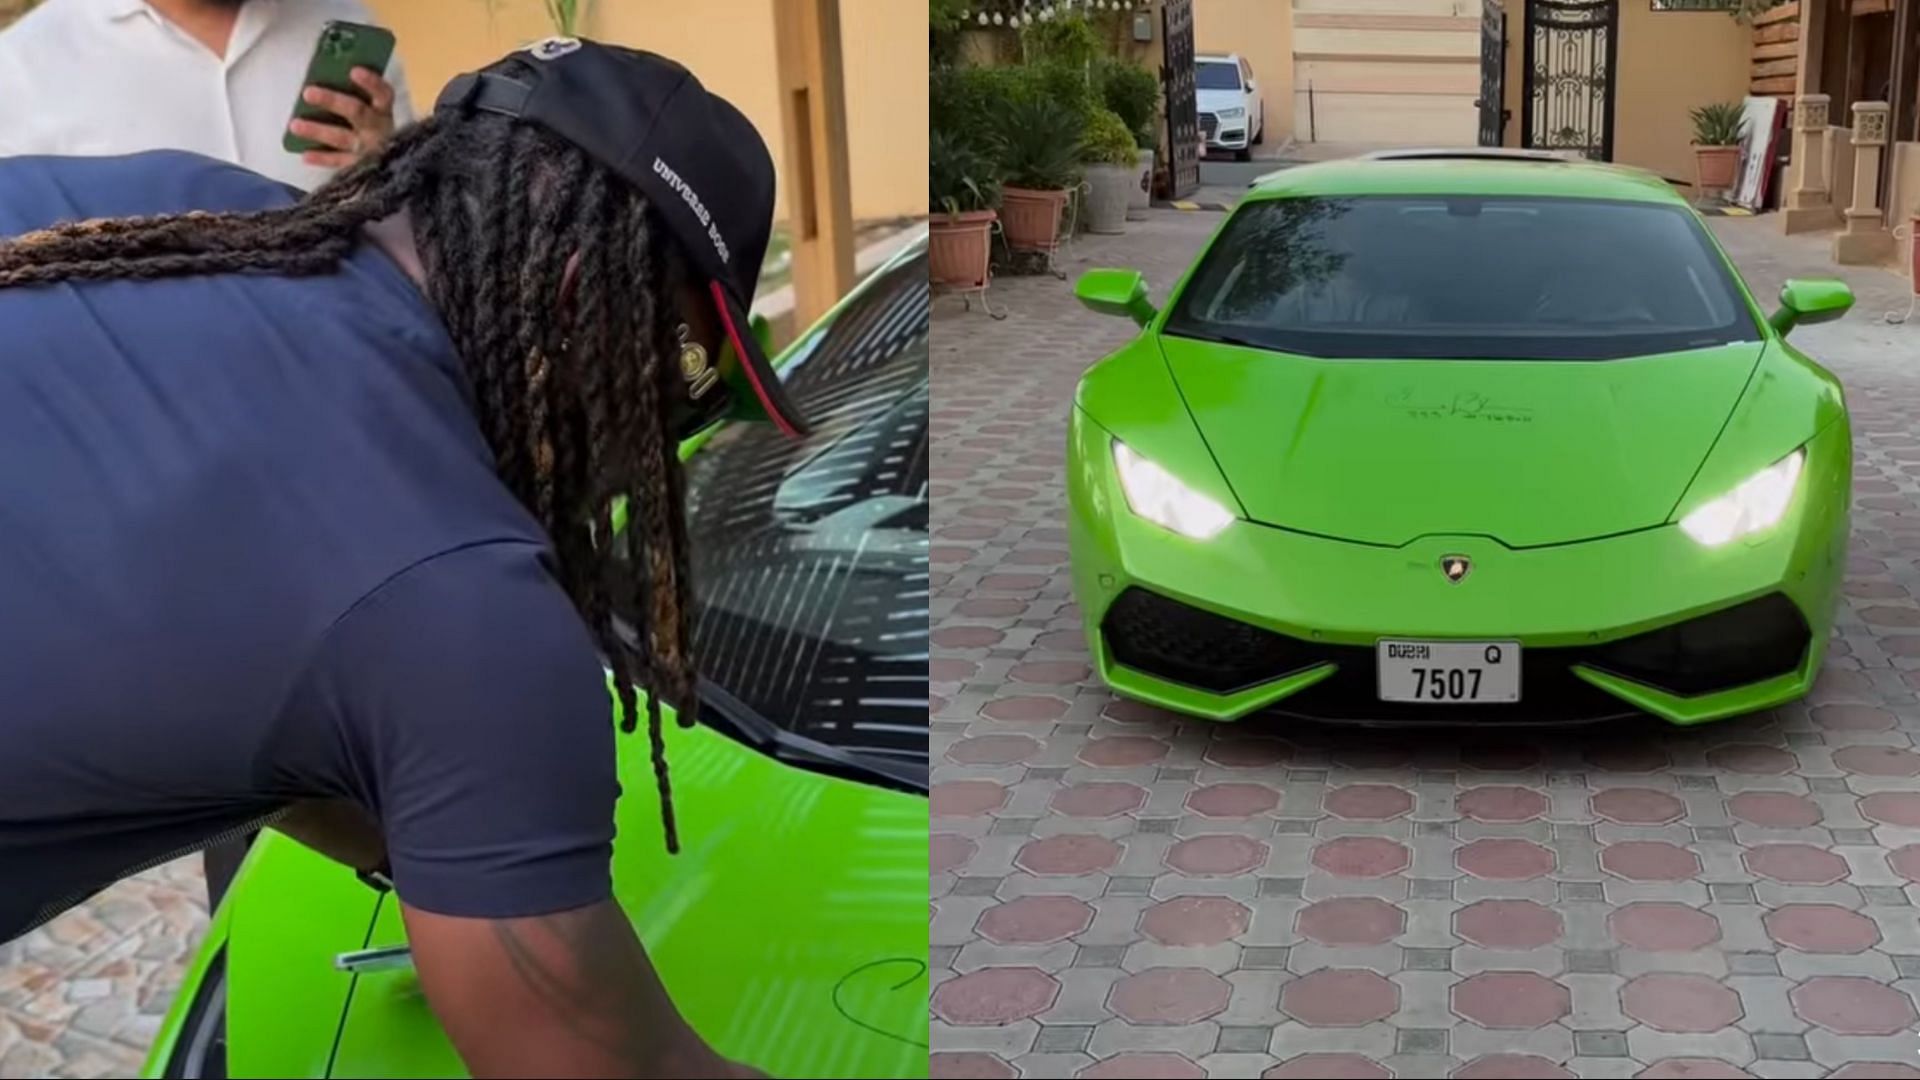 Chris Gayle was spotted signing a Lamborghini recently (Image: Instagram)